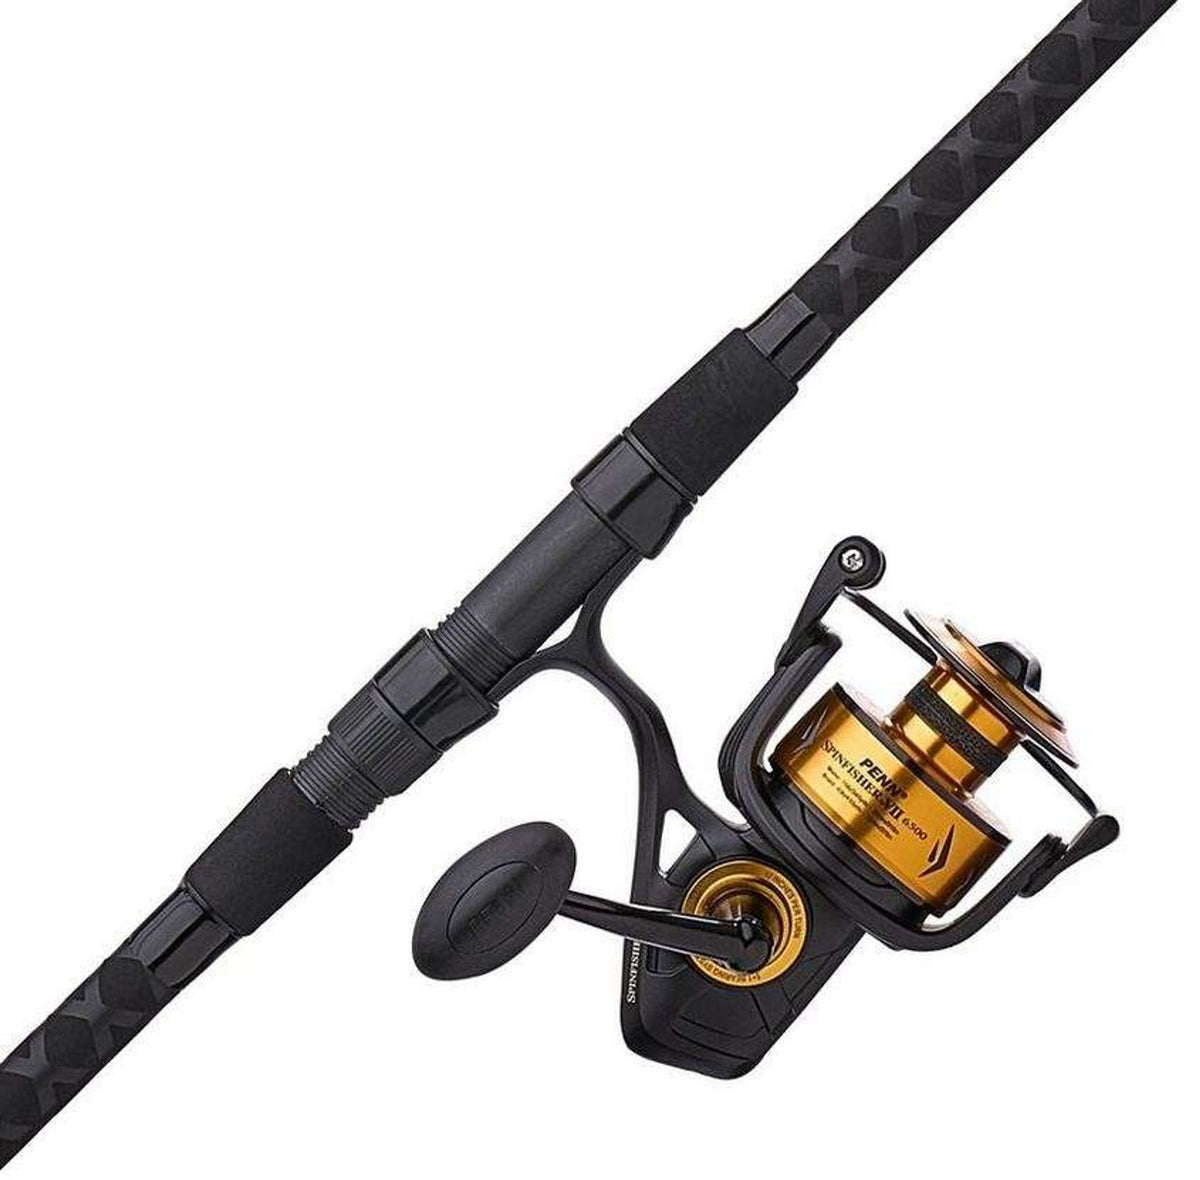 Penn Spinfisher VII Combo 8500 with 7&#39; H 1-Piece Spin Combo - SSVII8500701H